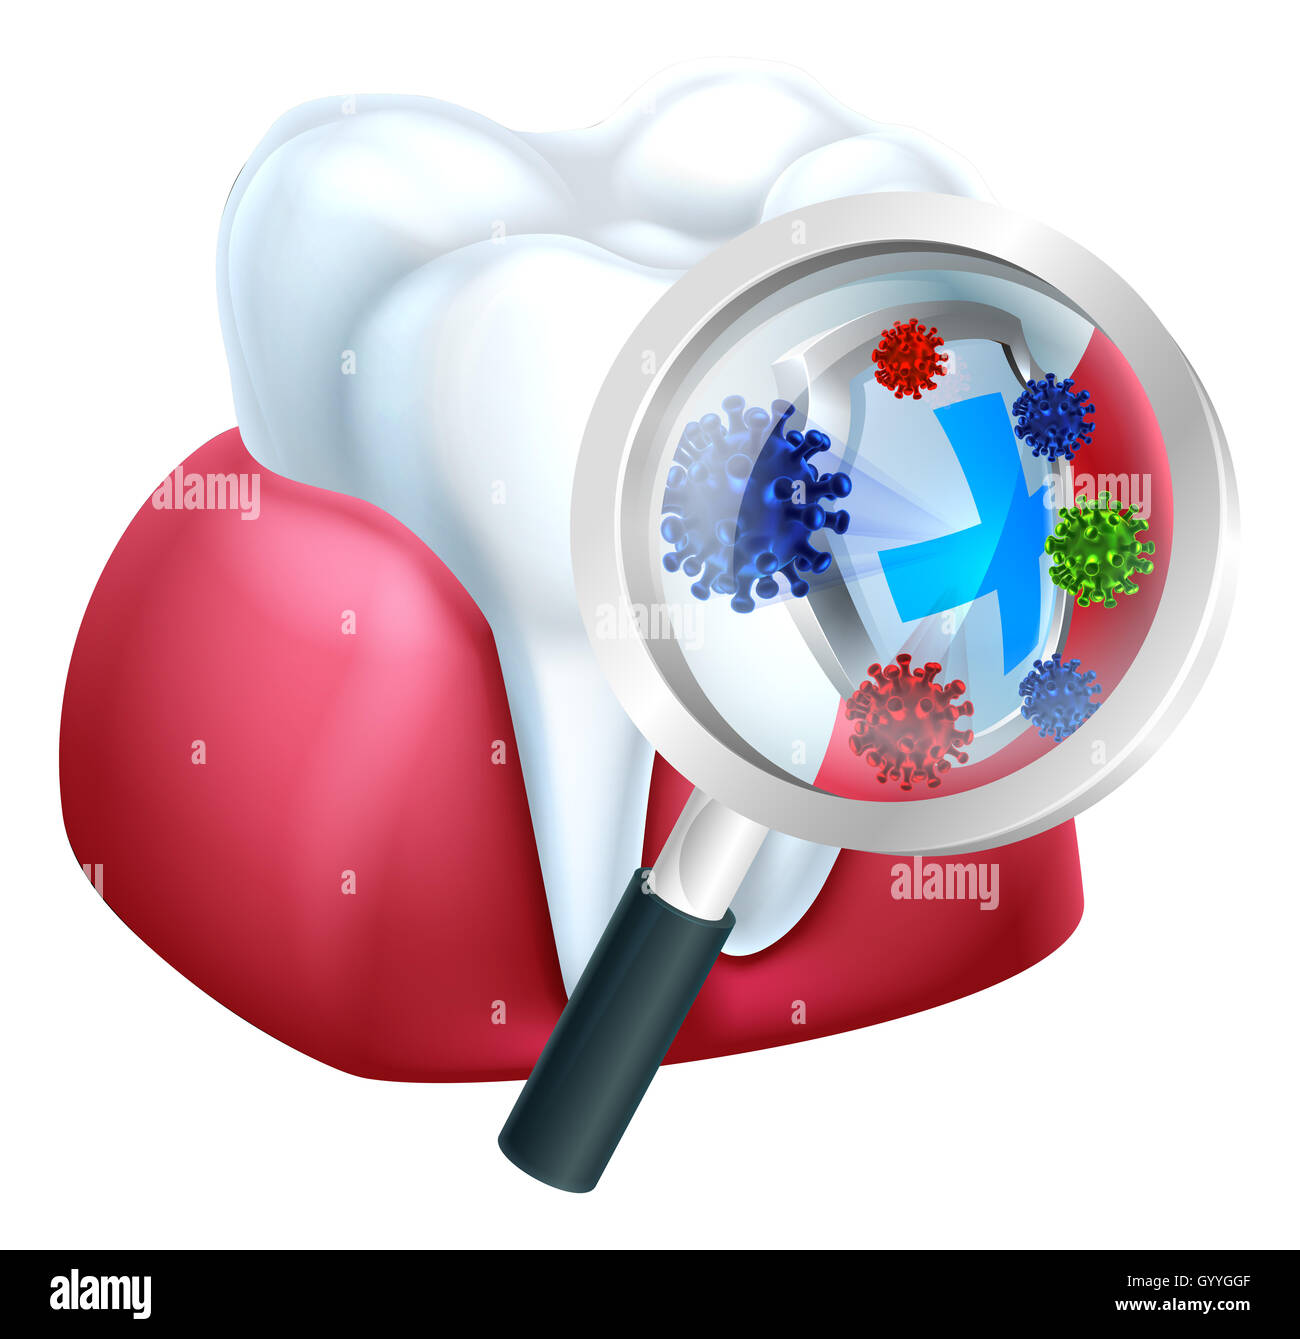 Tooth and gum being protected from bacteria by a shield magnified by a magnifying glass concept Stock Photo